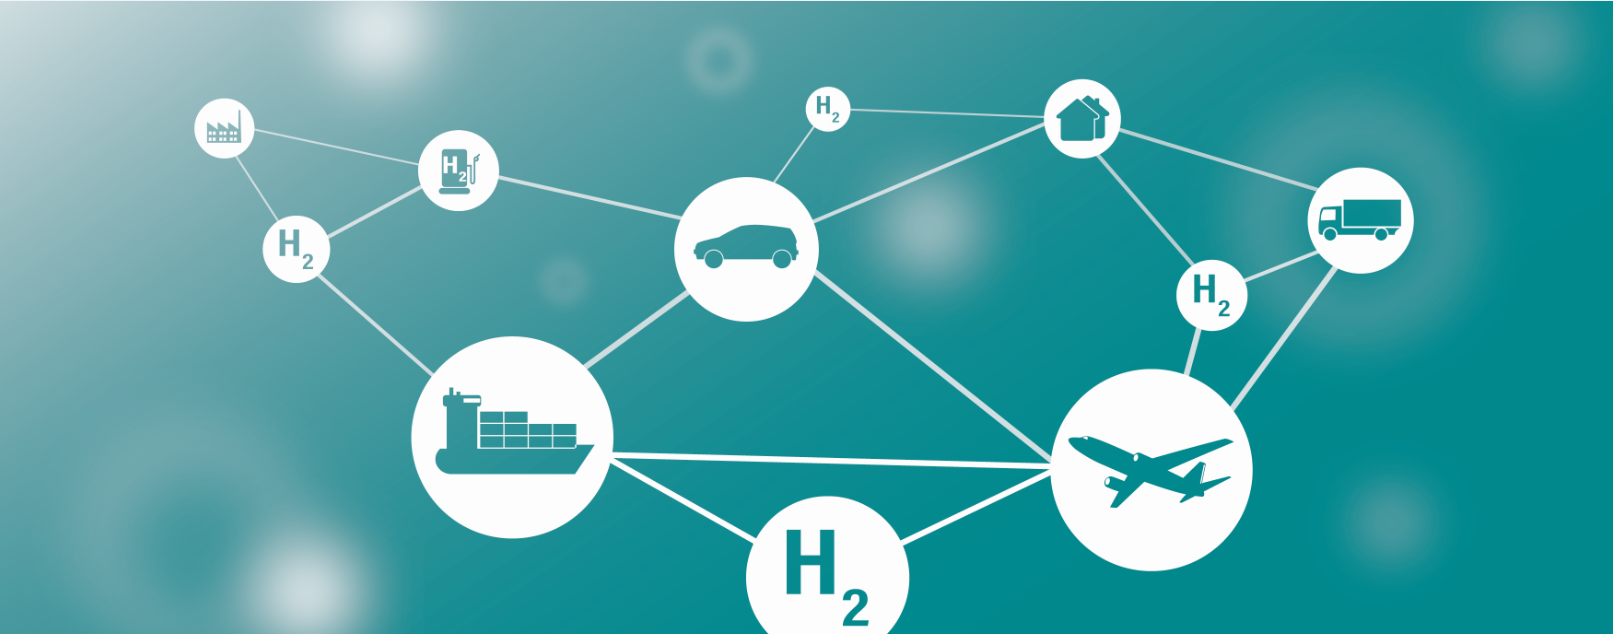 Connected dots with symbols of a ship, airplane, car and H2